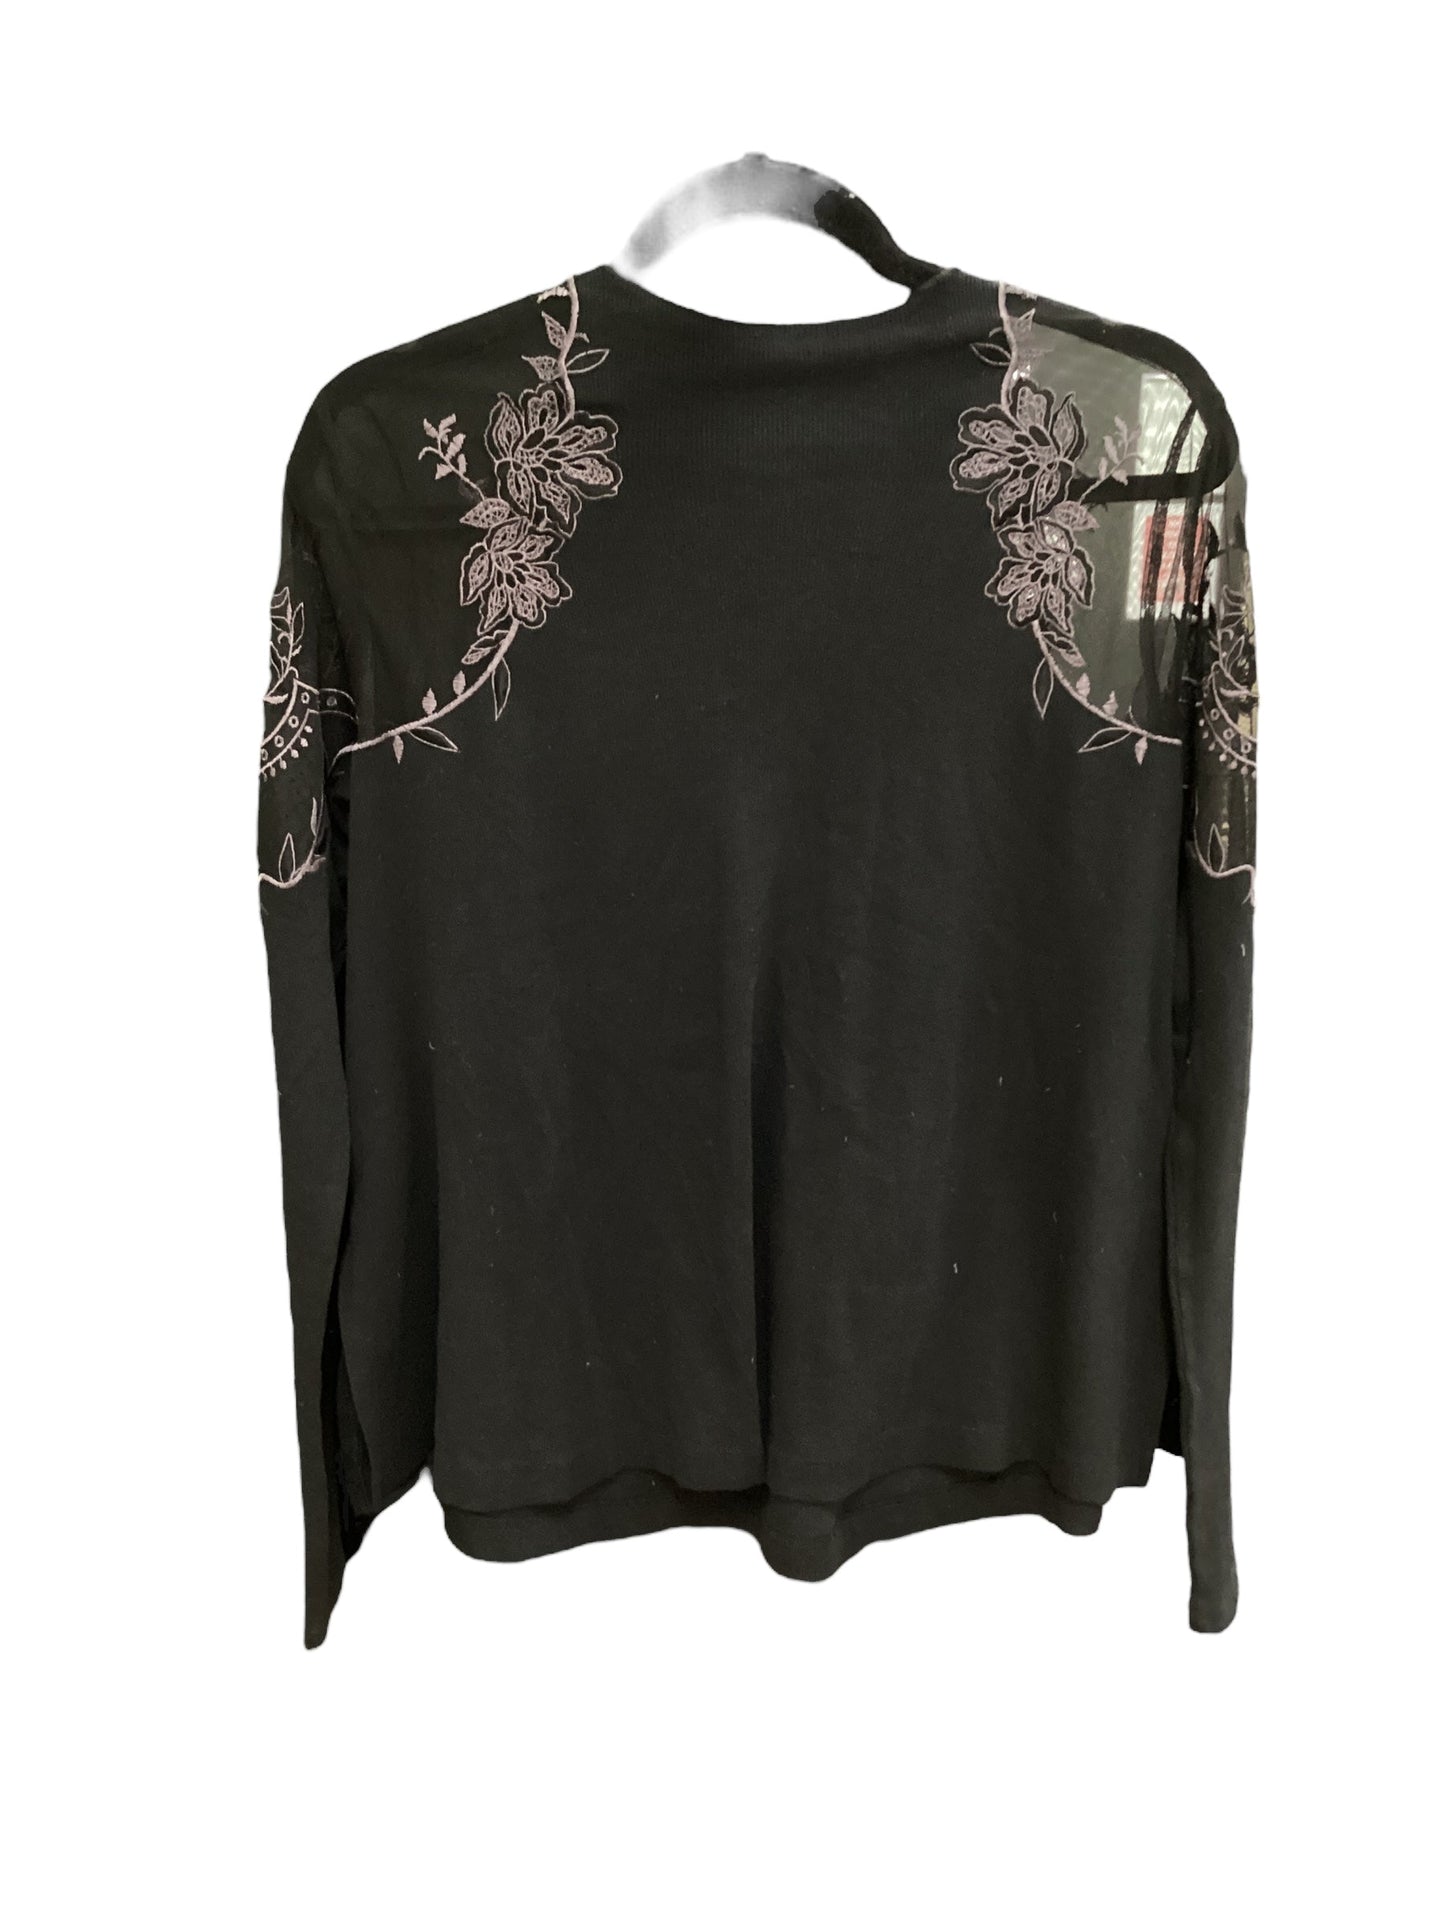 Black Top Long Sleeve Free People, Size Xs